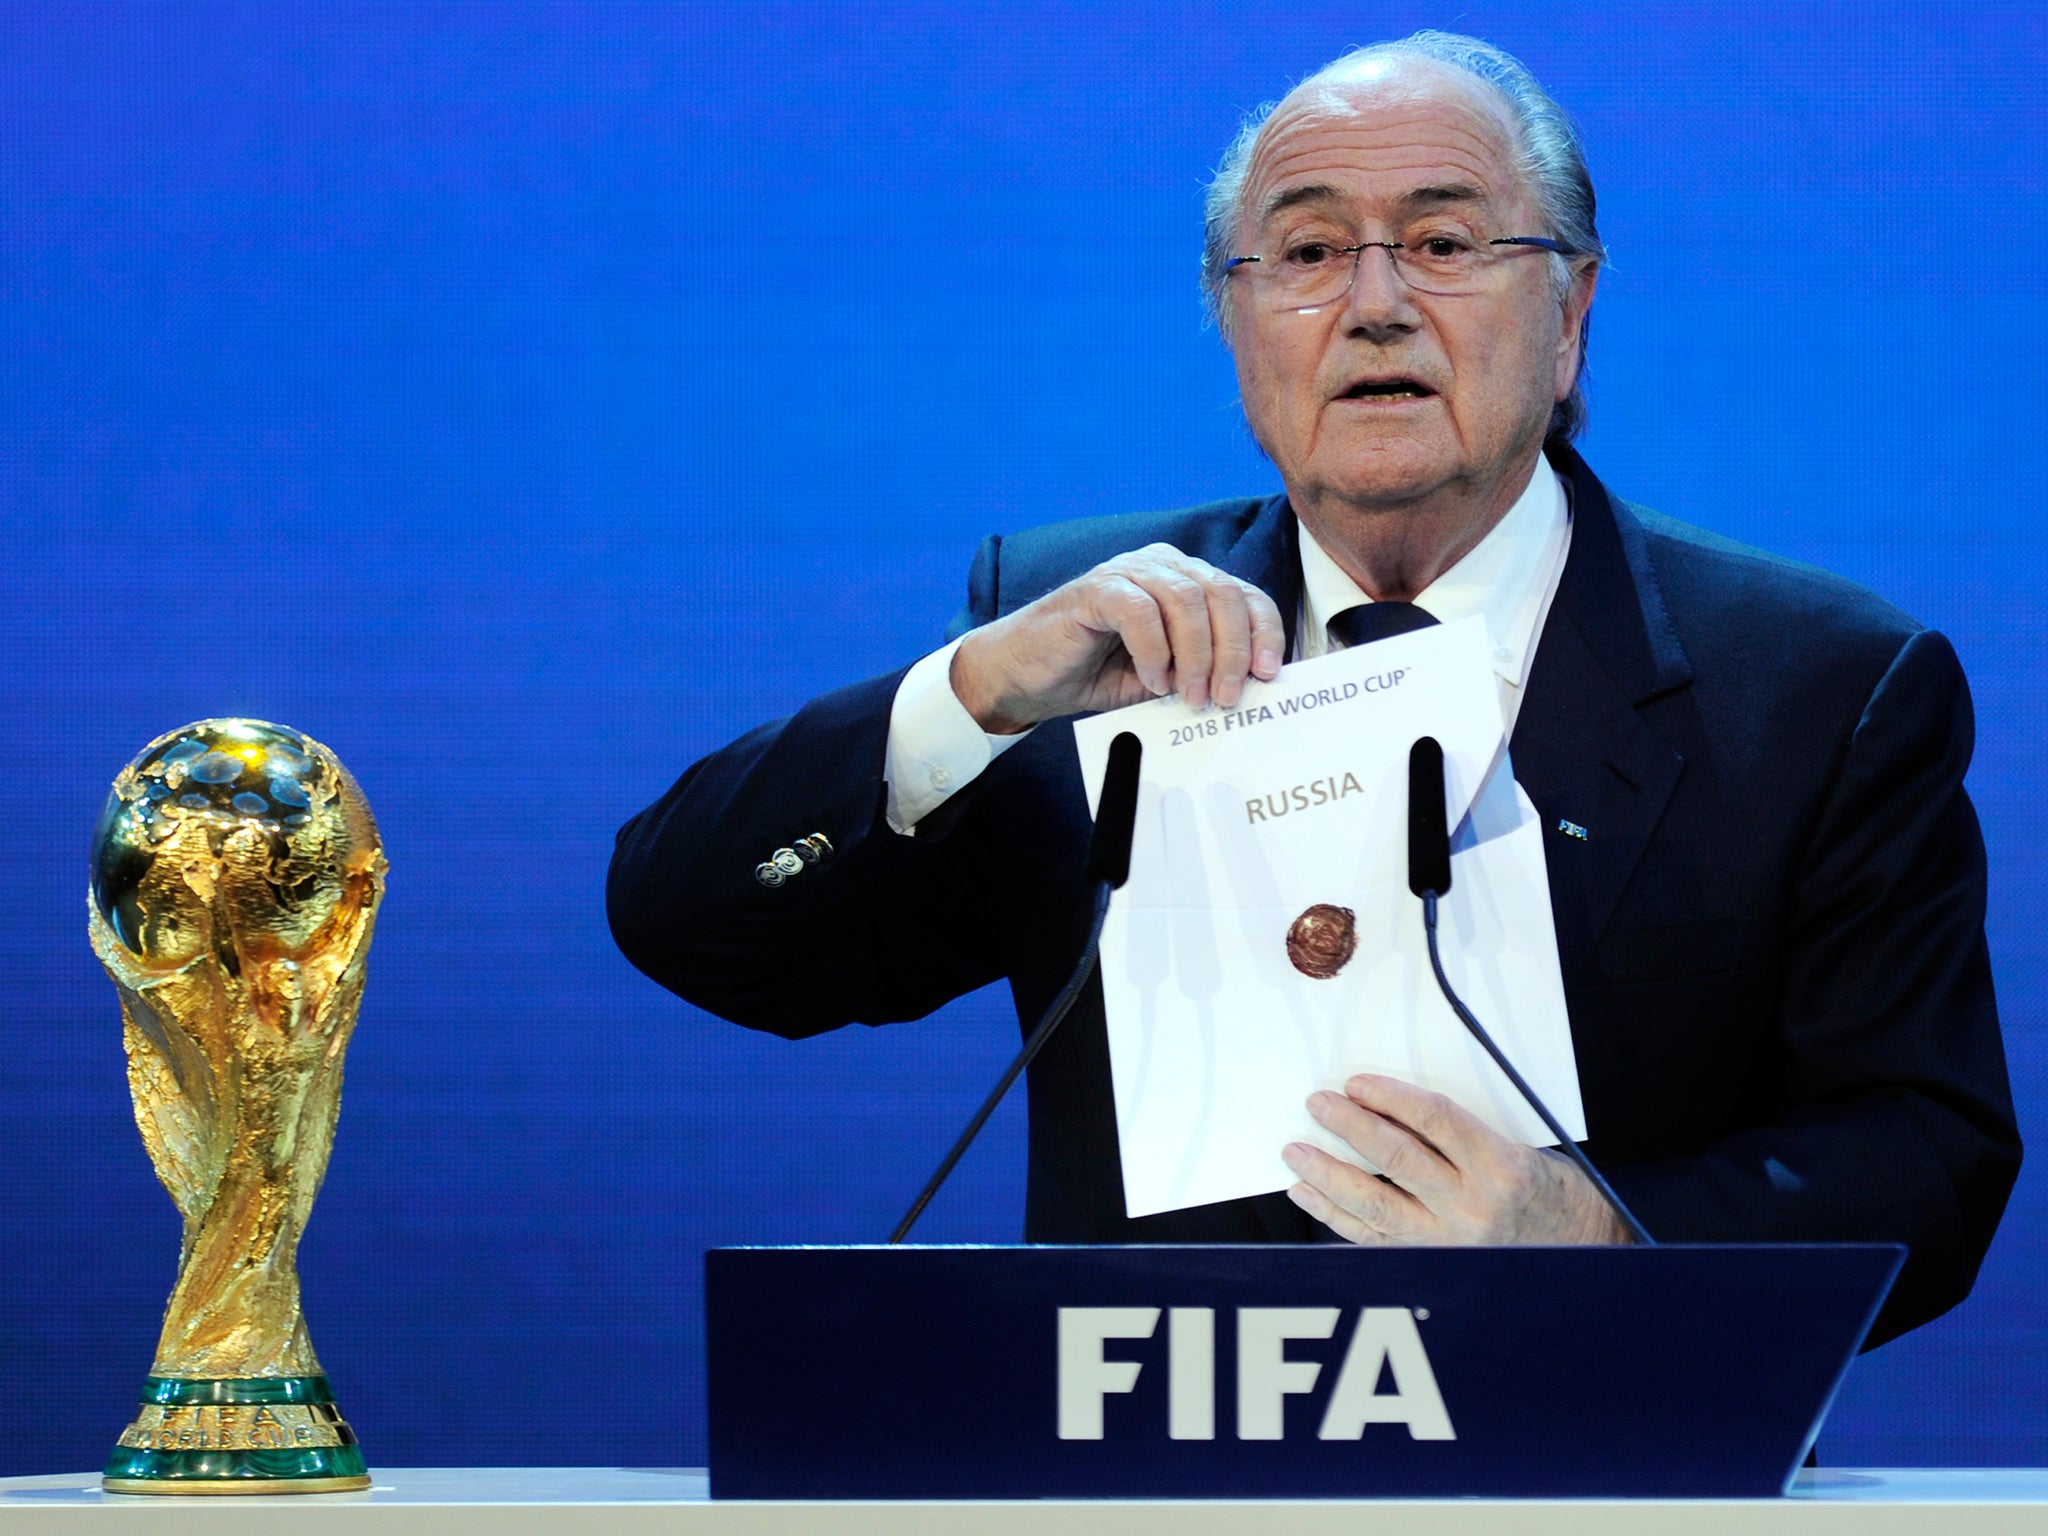 Sepp Blatter reveals Russia as the hosts of the 2018 tournament